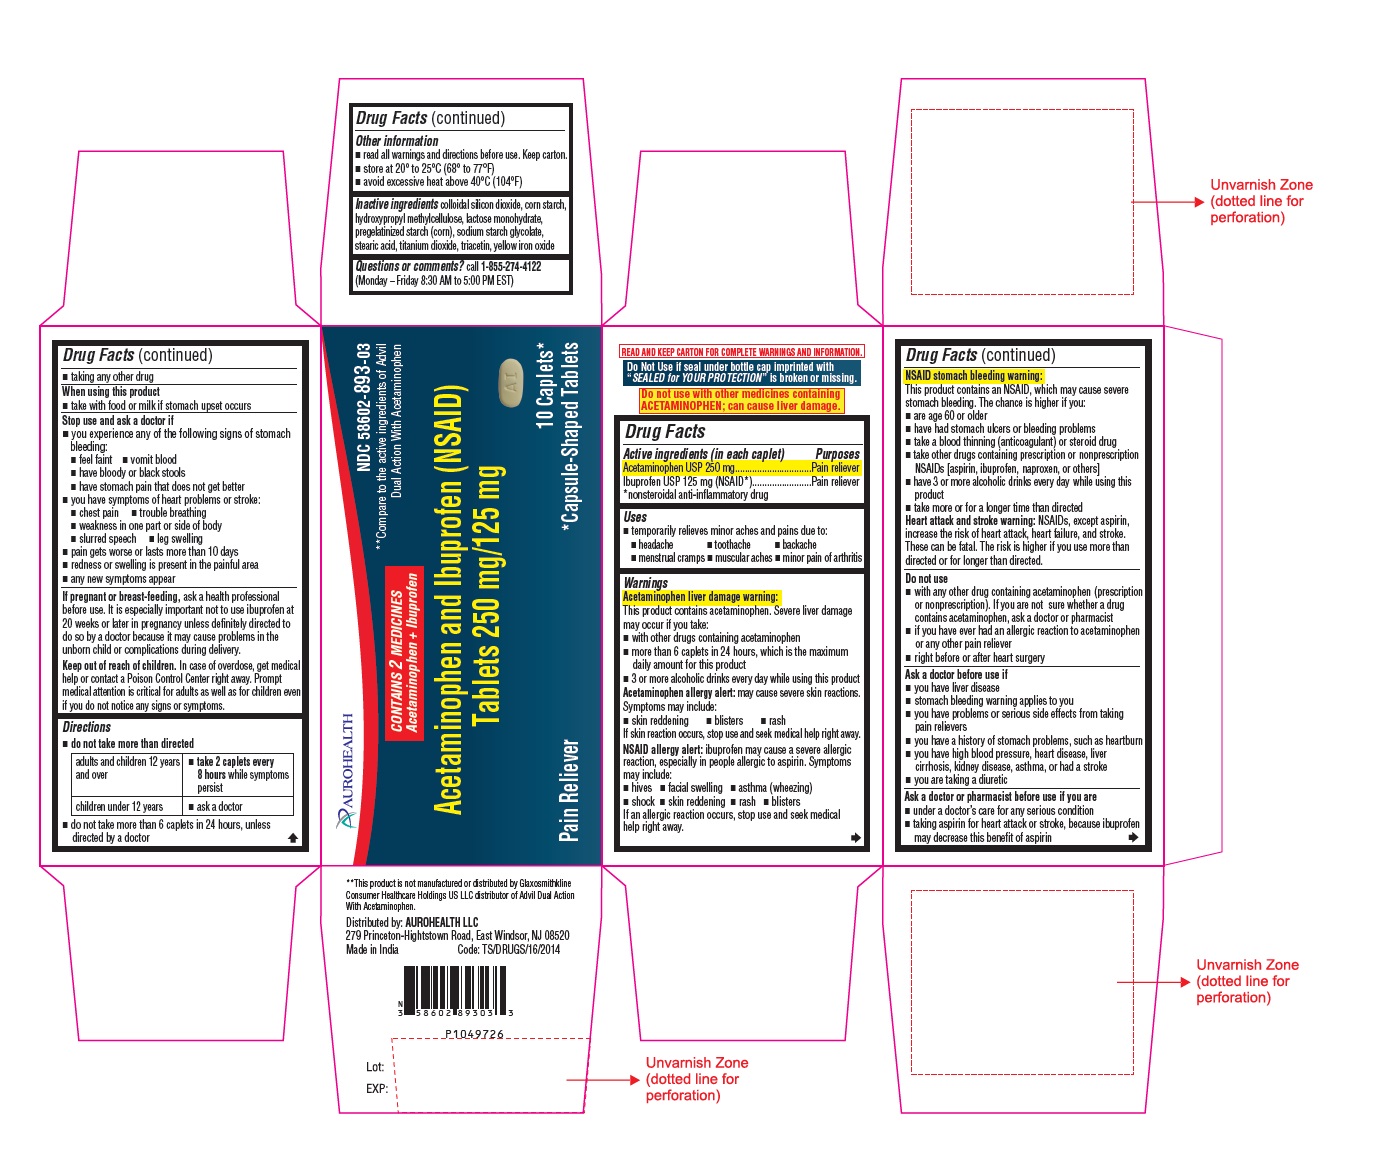 PACKAGE LABEL-PRINCIPAL DISPLAY PANEL - 250 mg/125 mg Container Carton (10 Caplets)